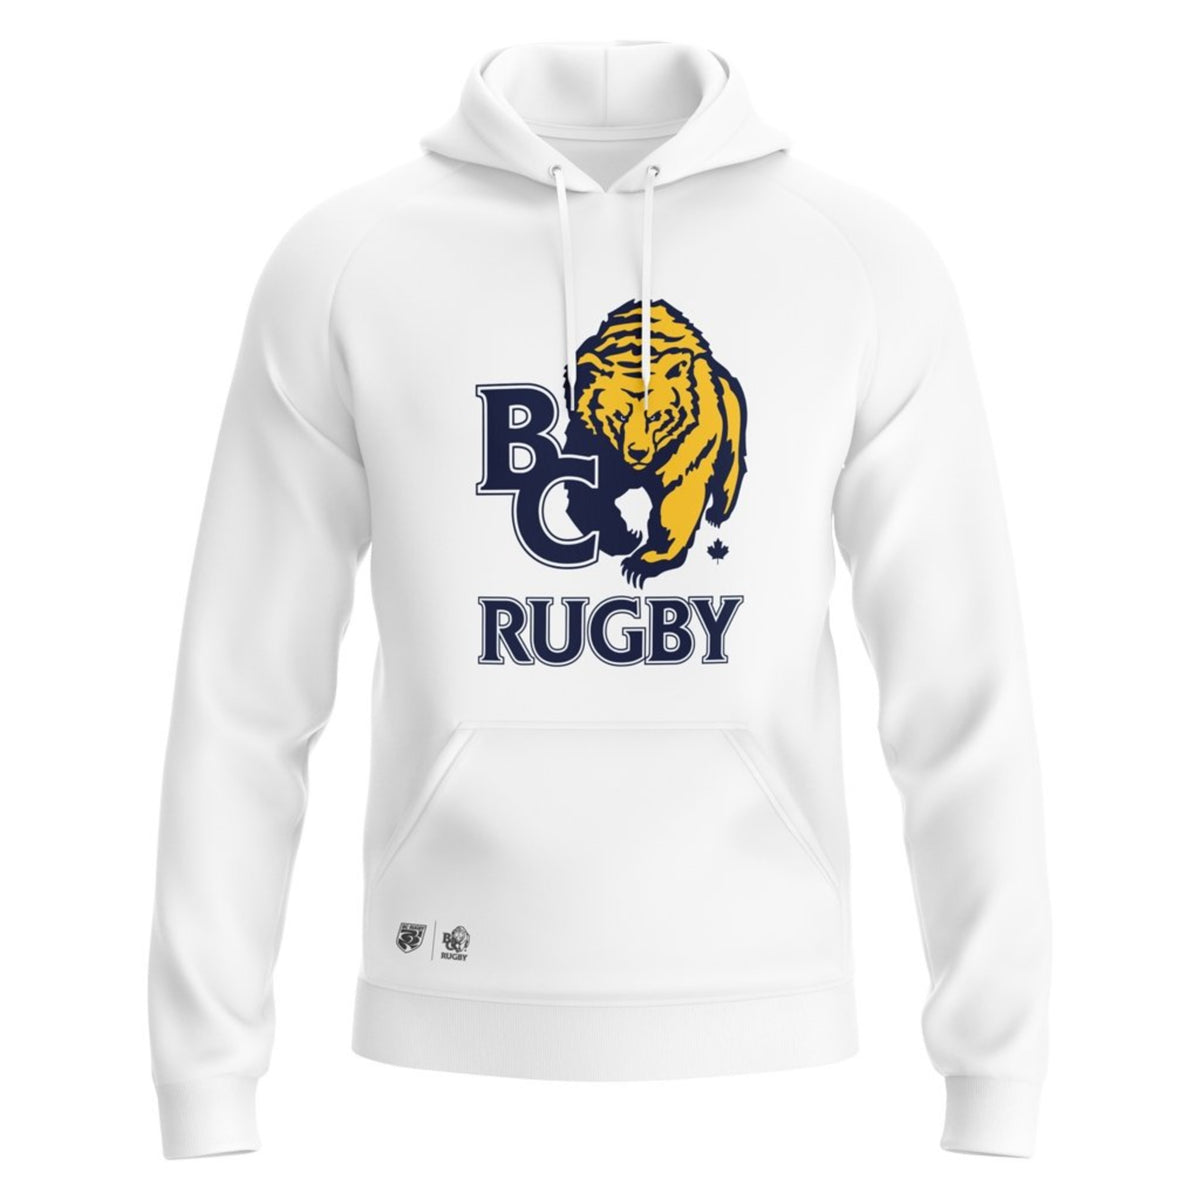 BC Rugby 2021 &quot;LArge Logo Team&quot; Hoodie - Youth Unisex - www.therugbyshop.com www.therugbyshop.com YOUTH / WHITE / S XIX Brands HOODIES BC Rugby 2021 &quot;LArge Logo Team&quot; Hoodie - Youth Unisex